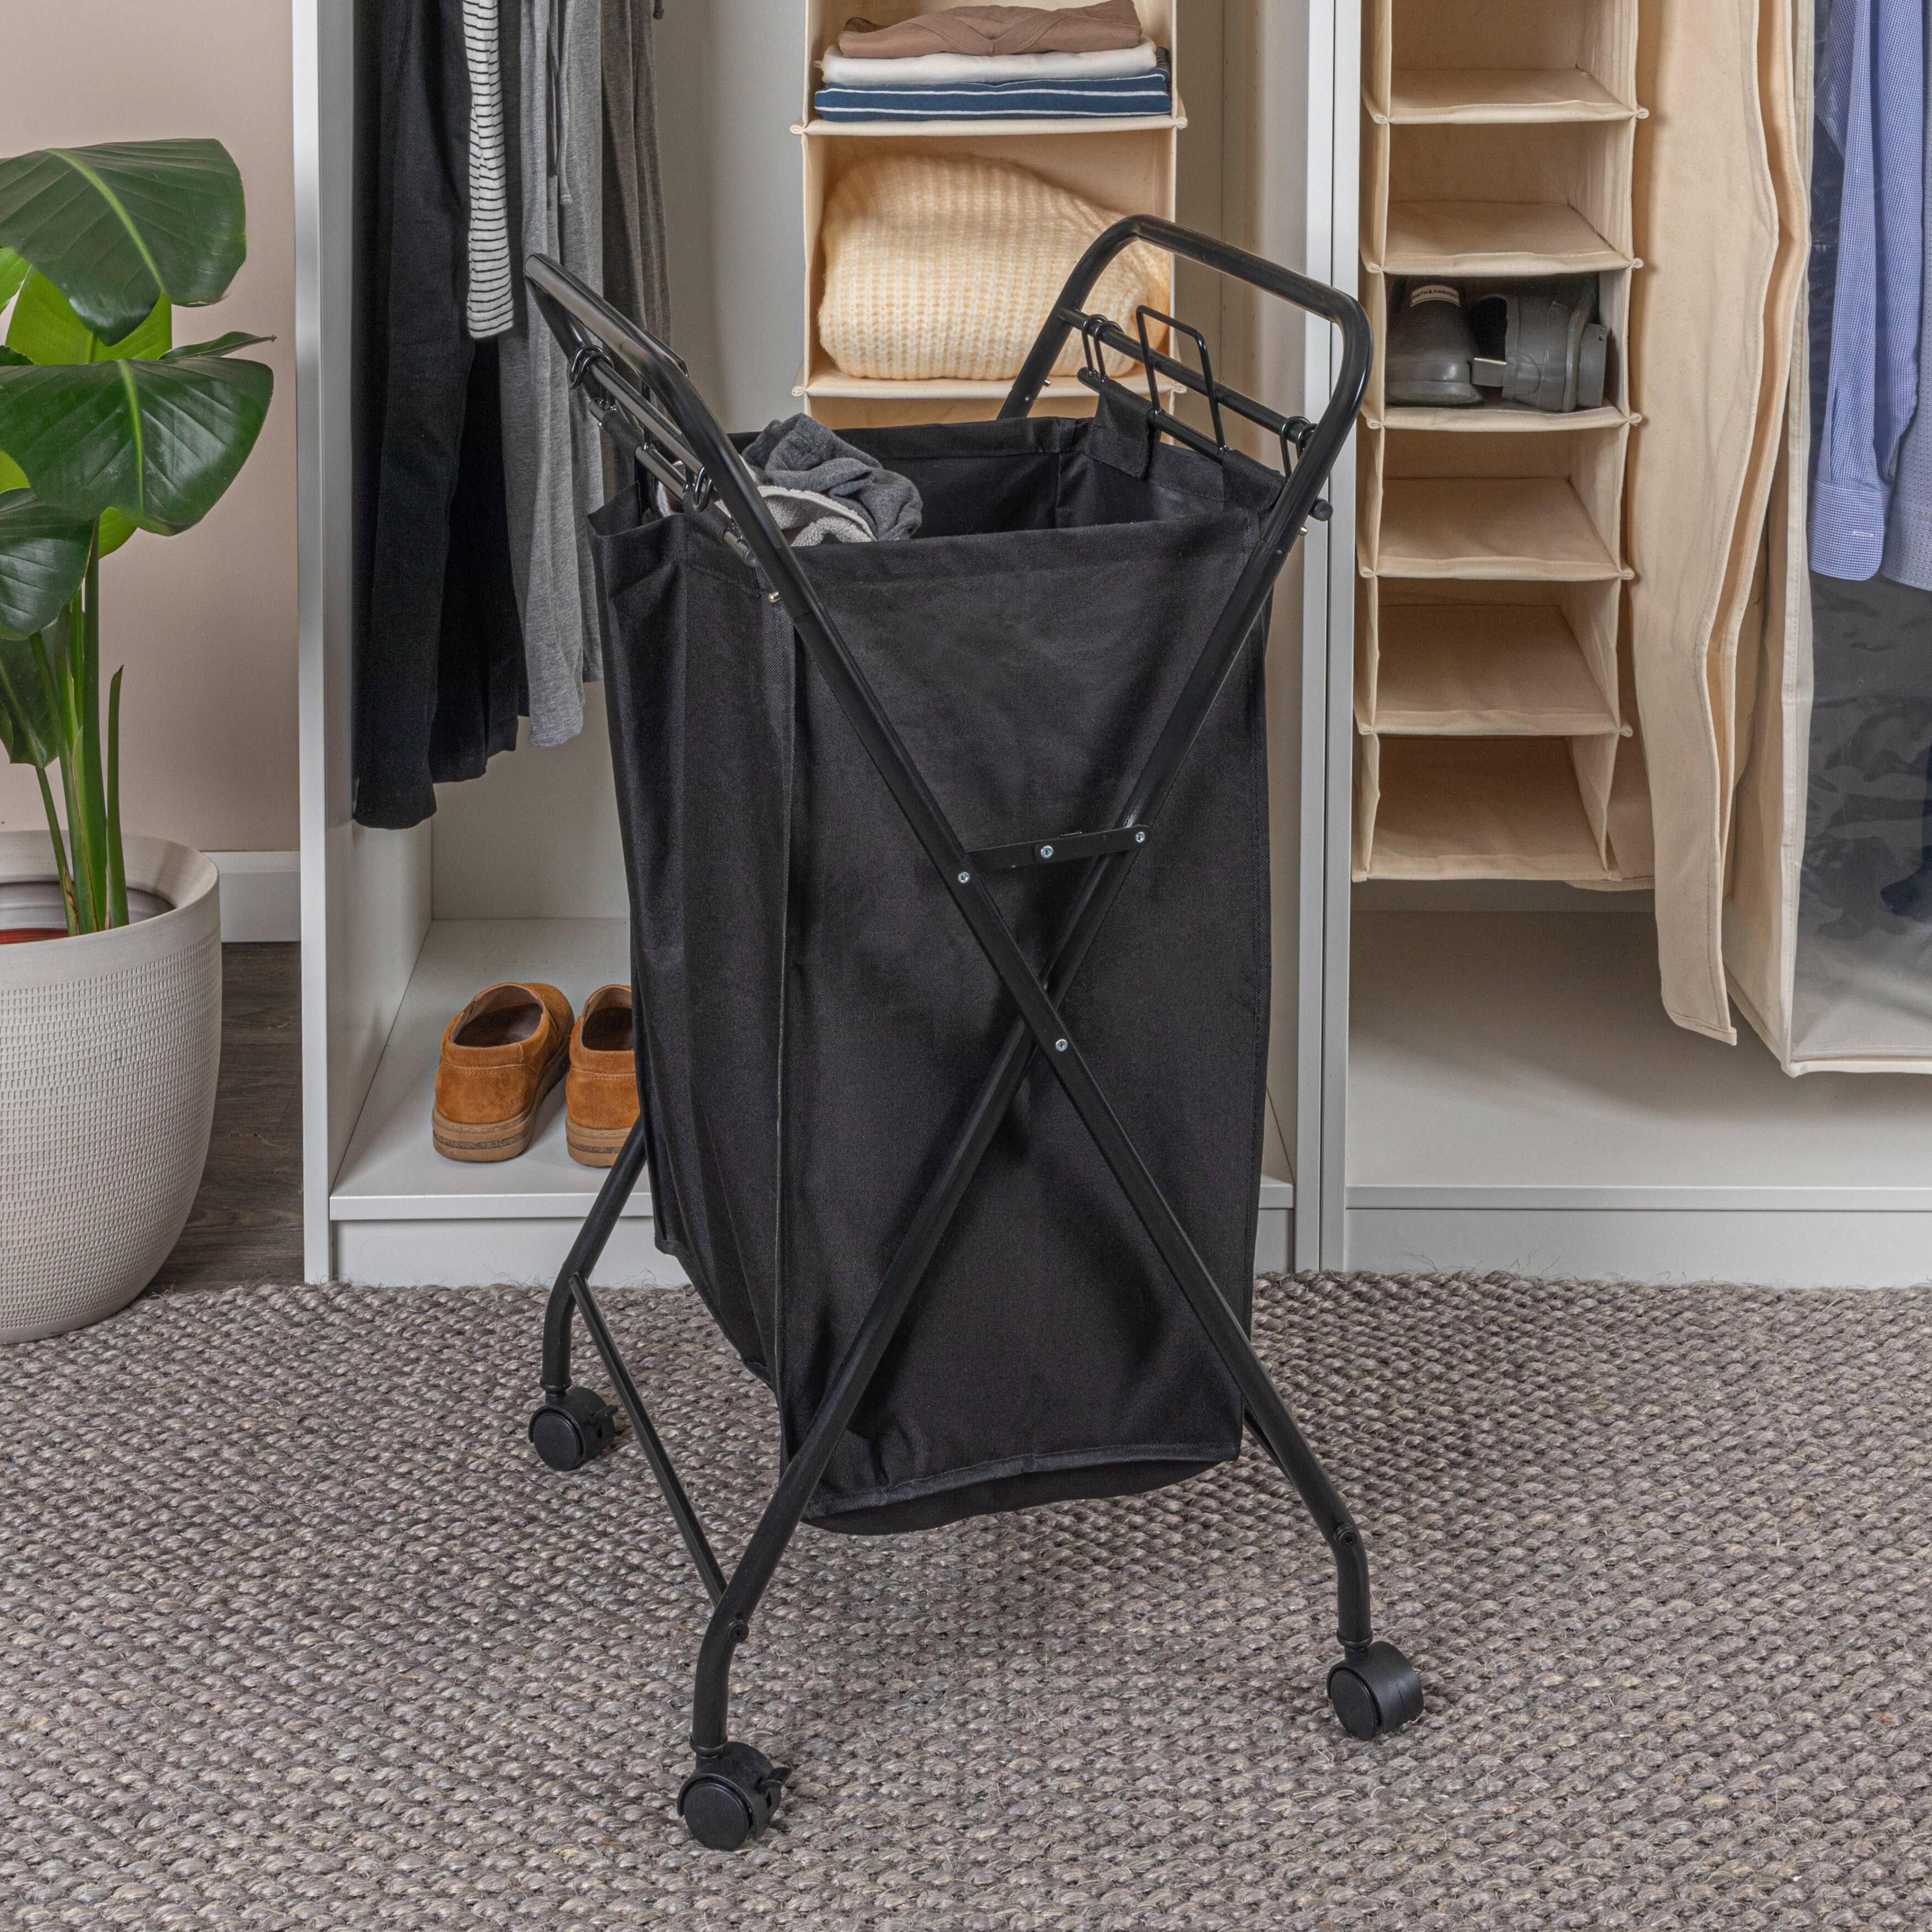 Rolling Clothes Hamper with Velcro Fasteners - Household Essentials | Image